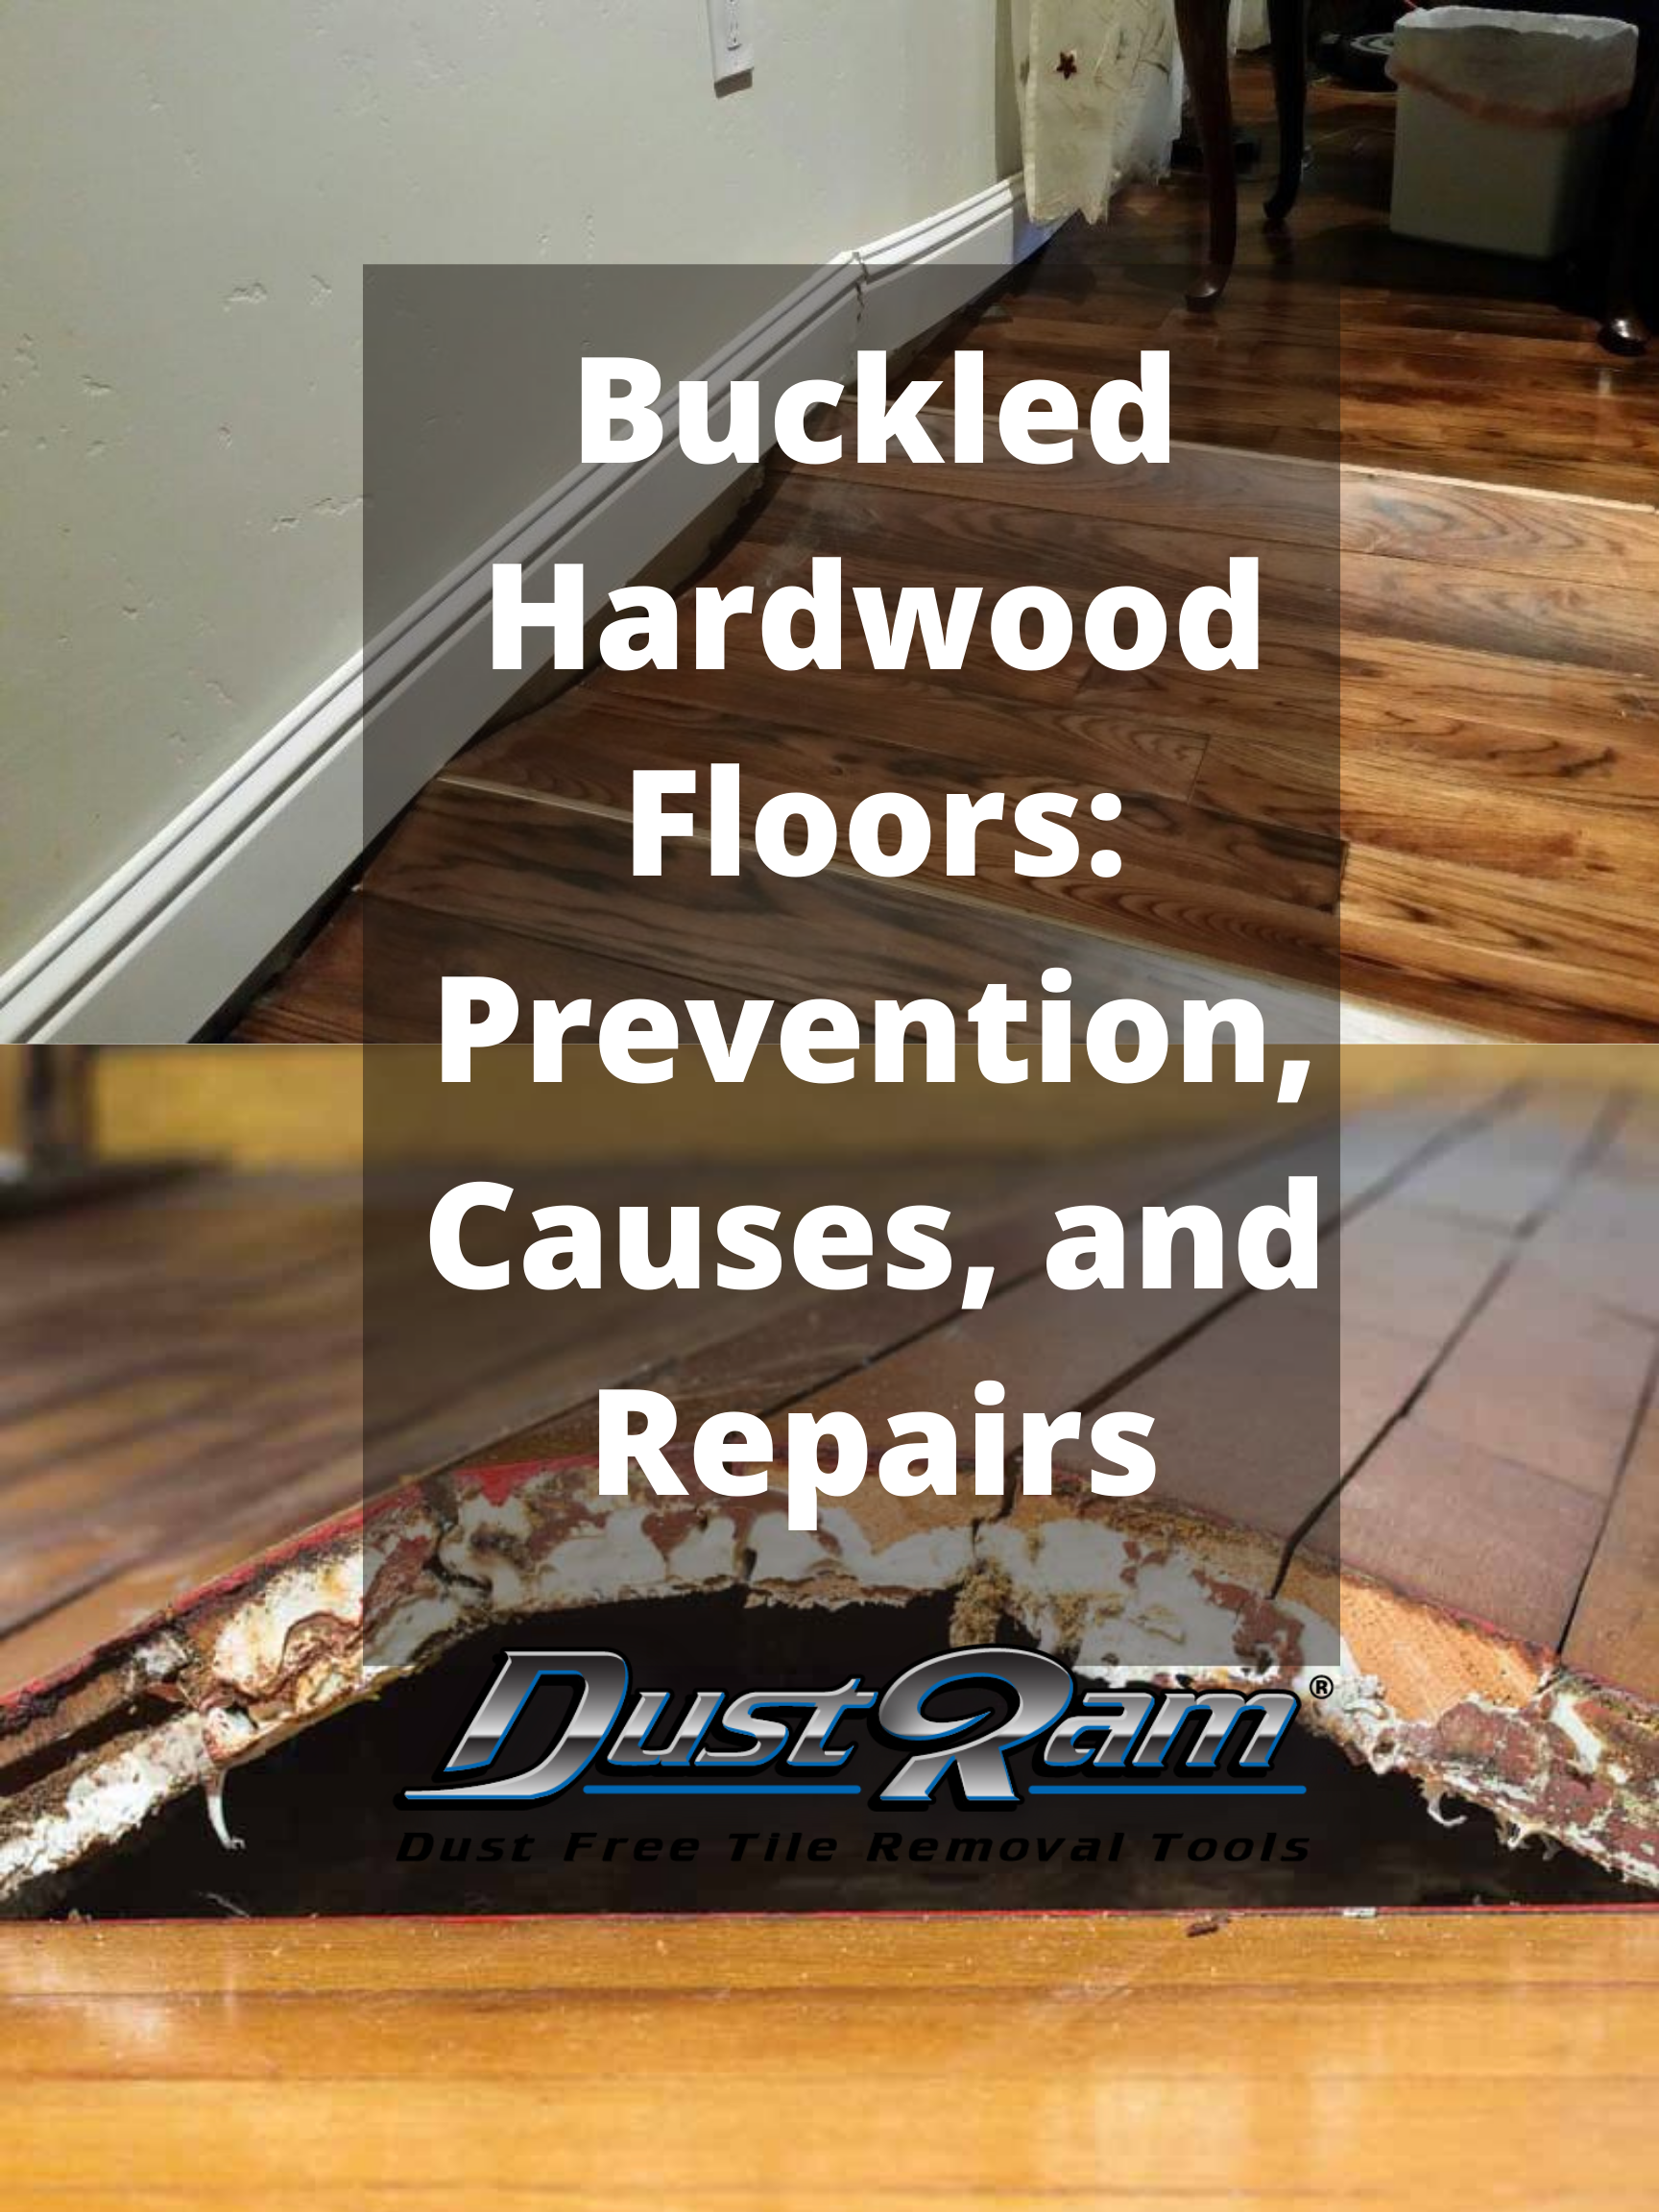 https://www.dustram.com/wp-content/uploads/2022/04/Buckling-Hardwood-Flooring-Causes-Prevention-and-Repairs.png